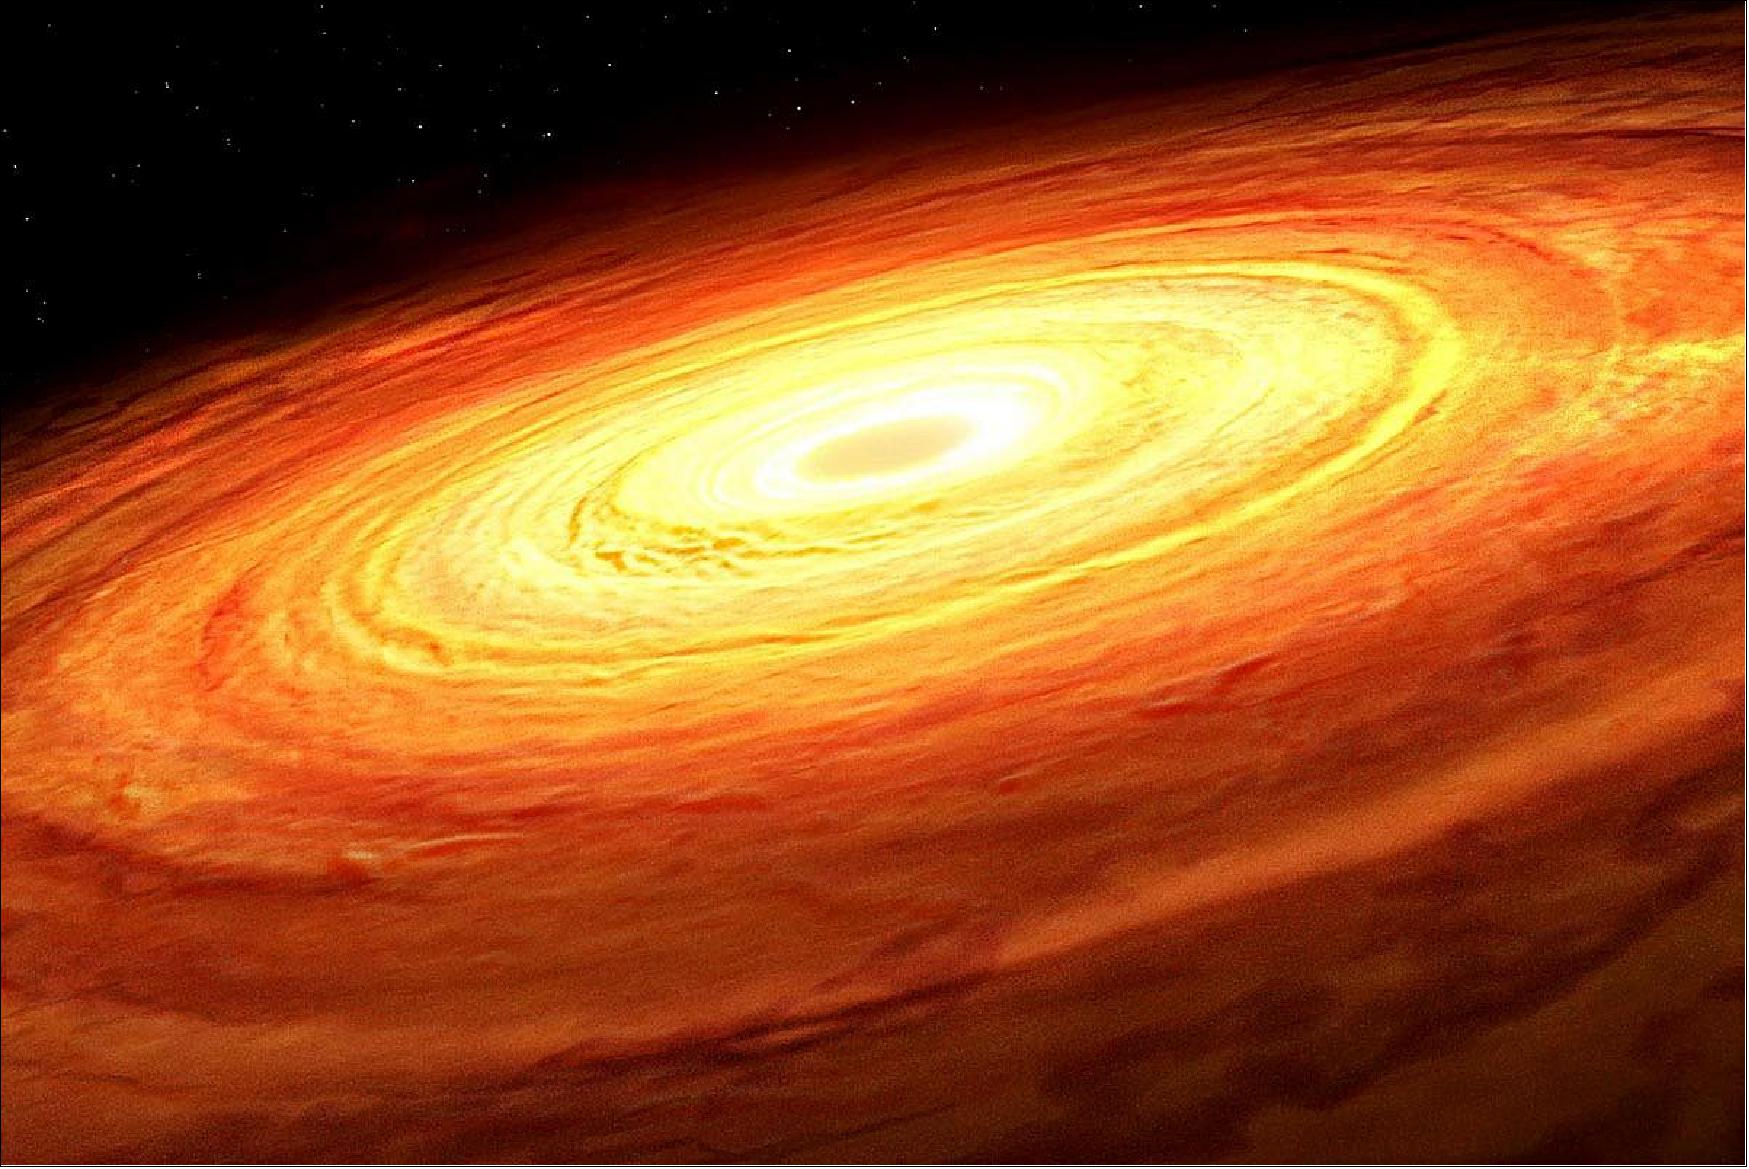 Figure 26: An artist's impression of an accretion disk rotating around an unseen supermassive black hole. The accretion process produces random fluctuations in luminosity from the disk over time, a pattern found to be related to the mass of the black hole in a new study led by University of Illinois Urbana-Champaign researchers (image credit: Graphic courtesy Mark A. Garlick/Simons Foundation)